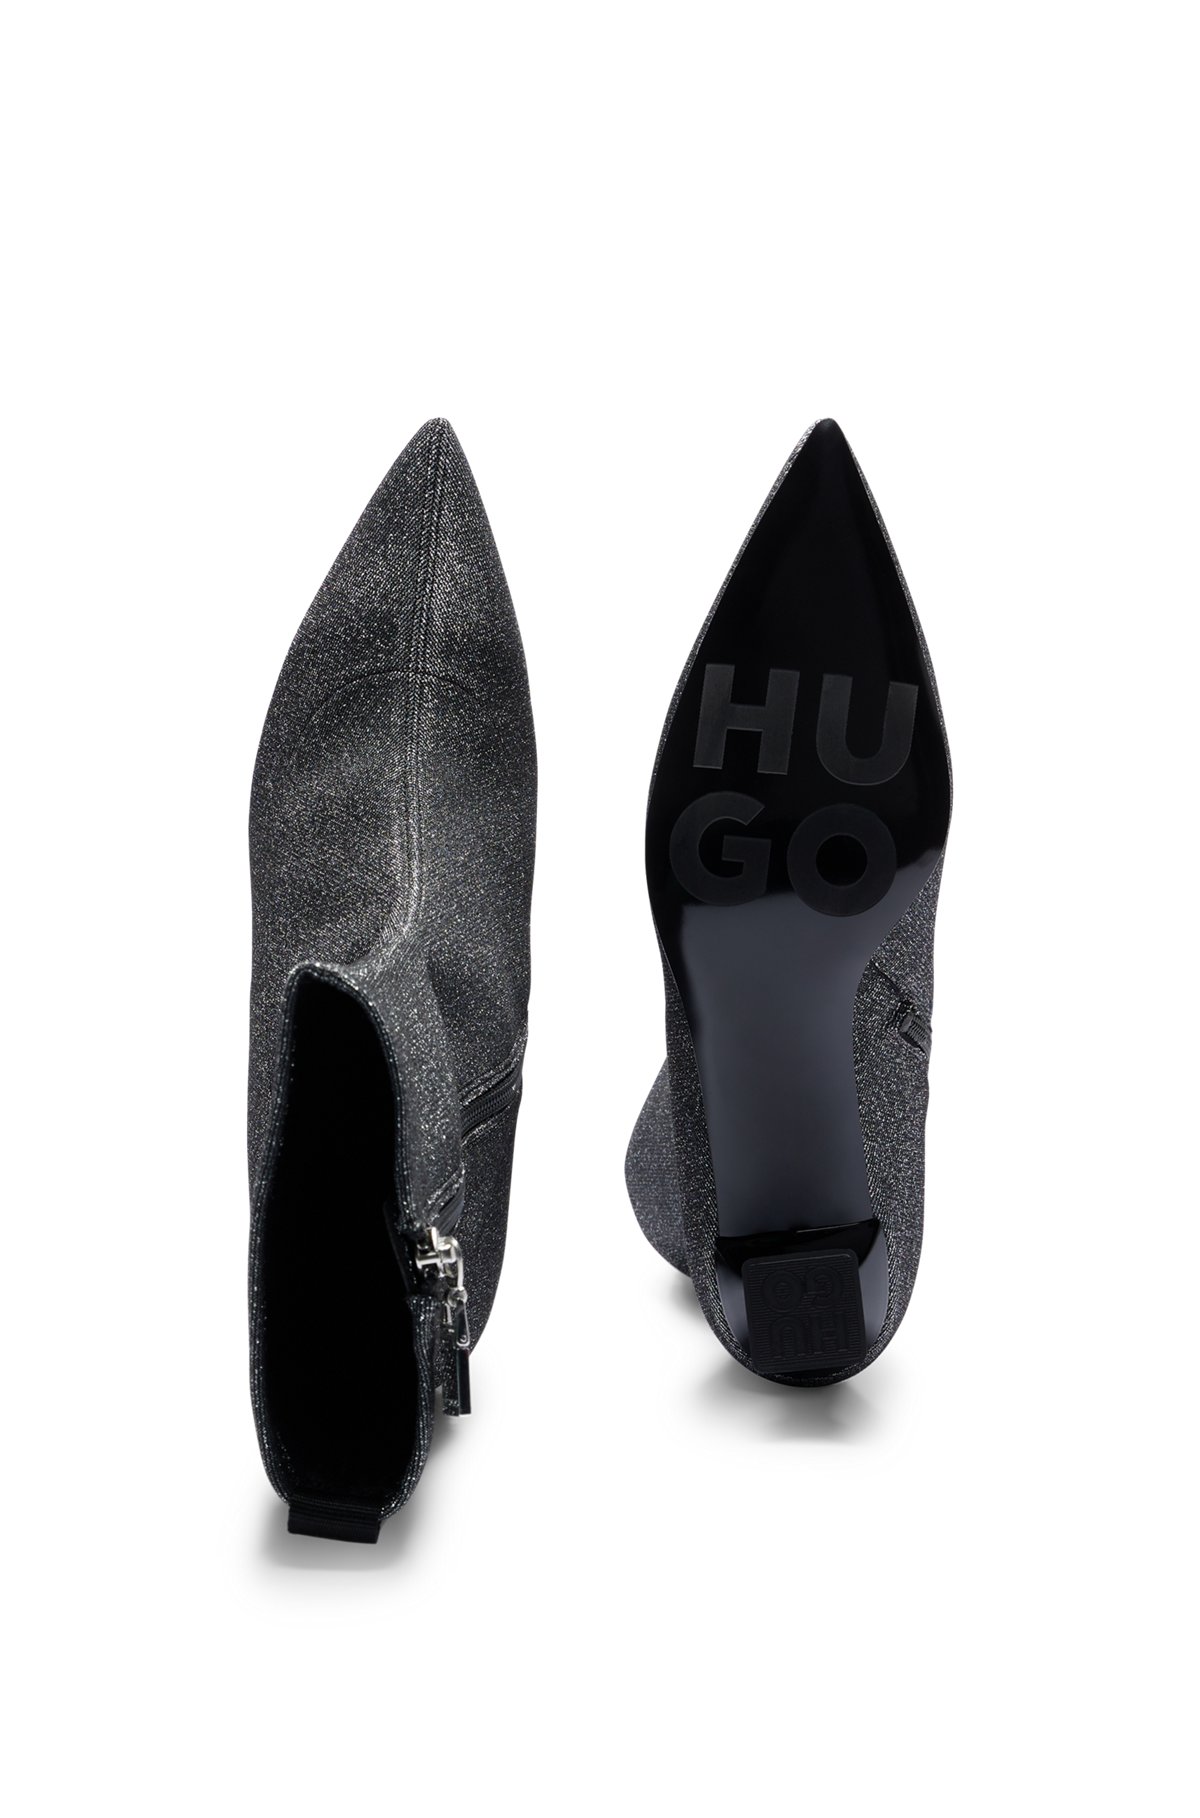 HUGO - Zipped ankle boots in sparkly fabric with feature heel